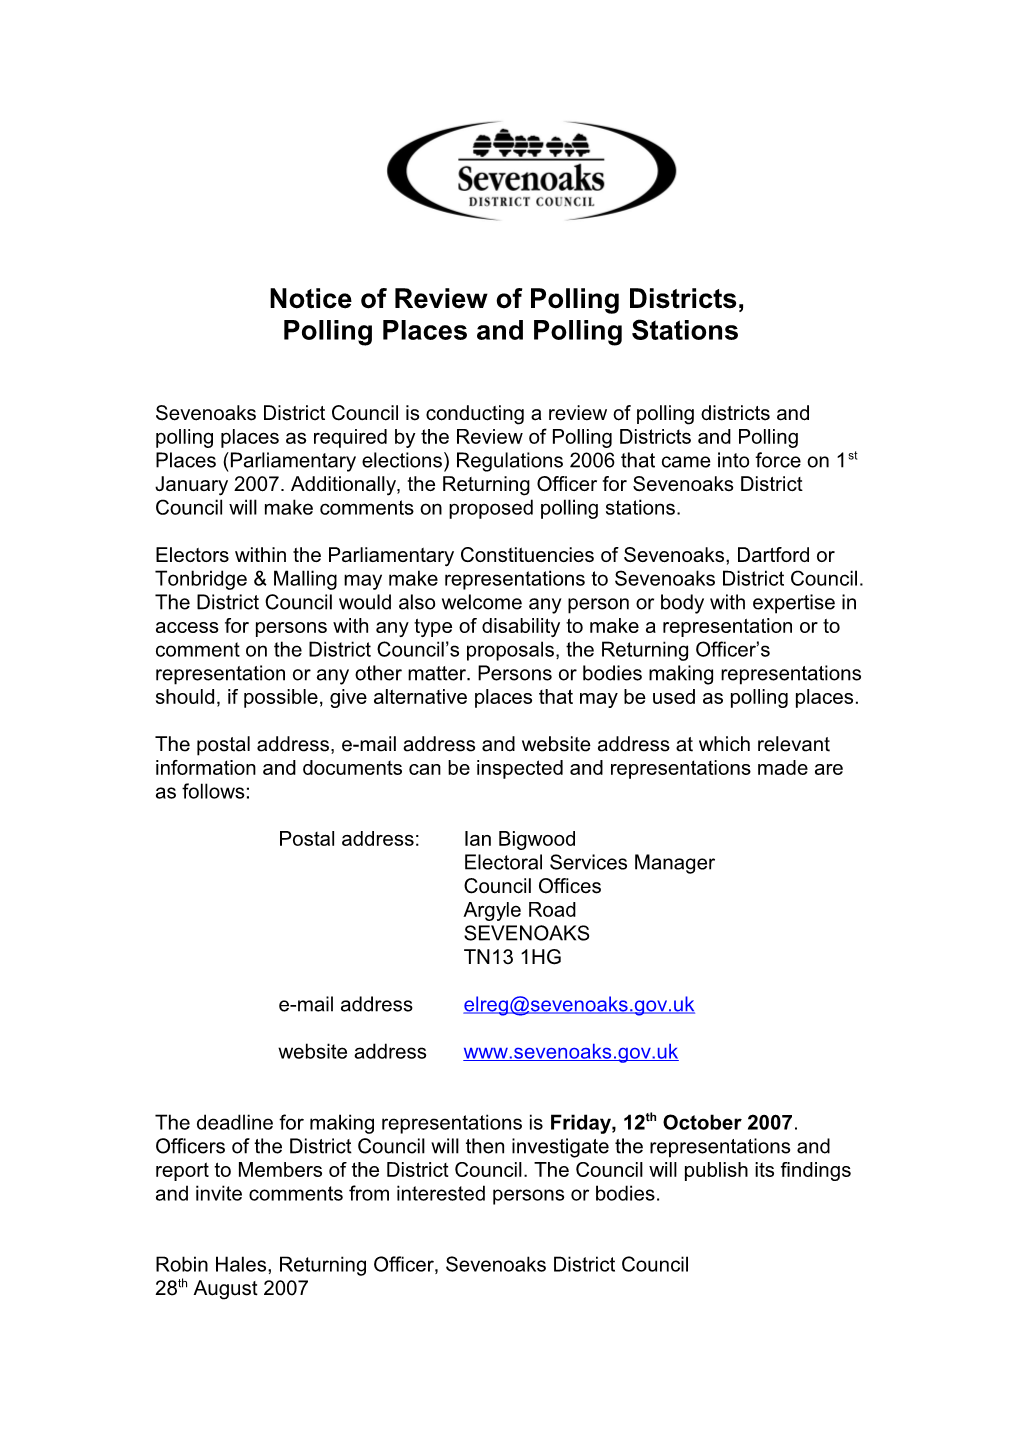 Notice of Review of Polling Districts, Polling Places and Polling Stations